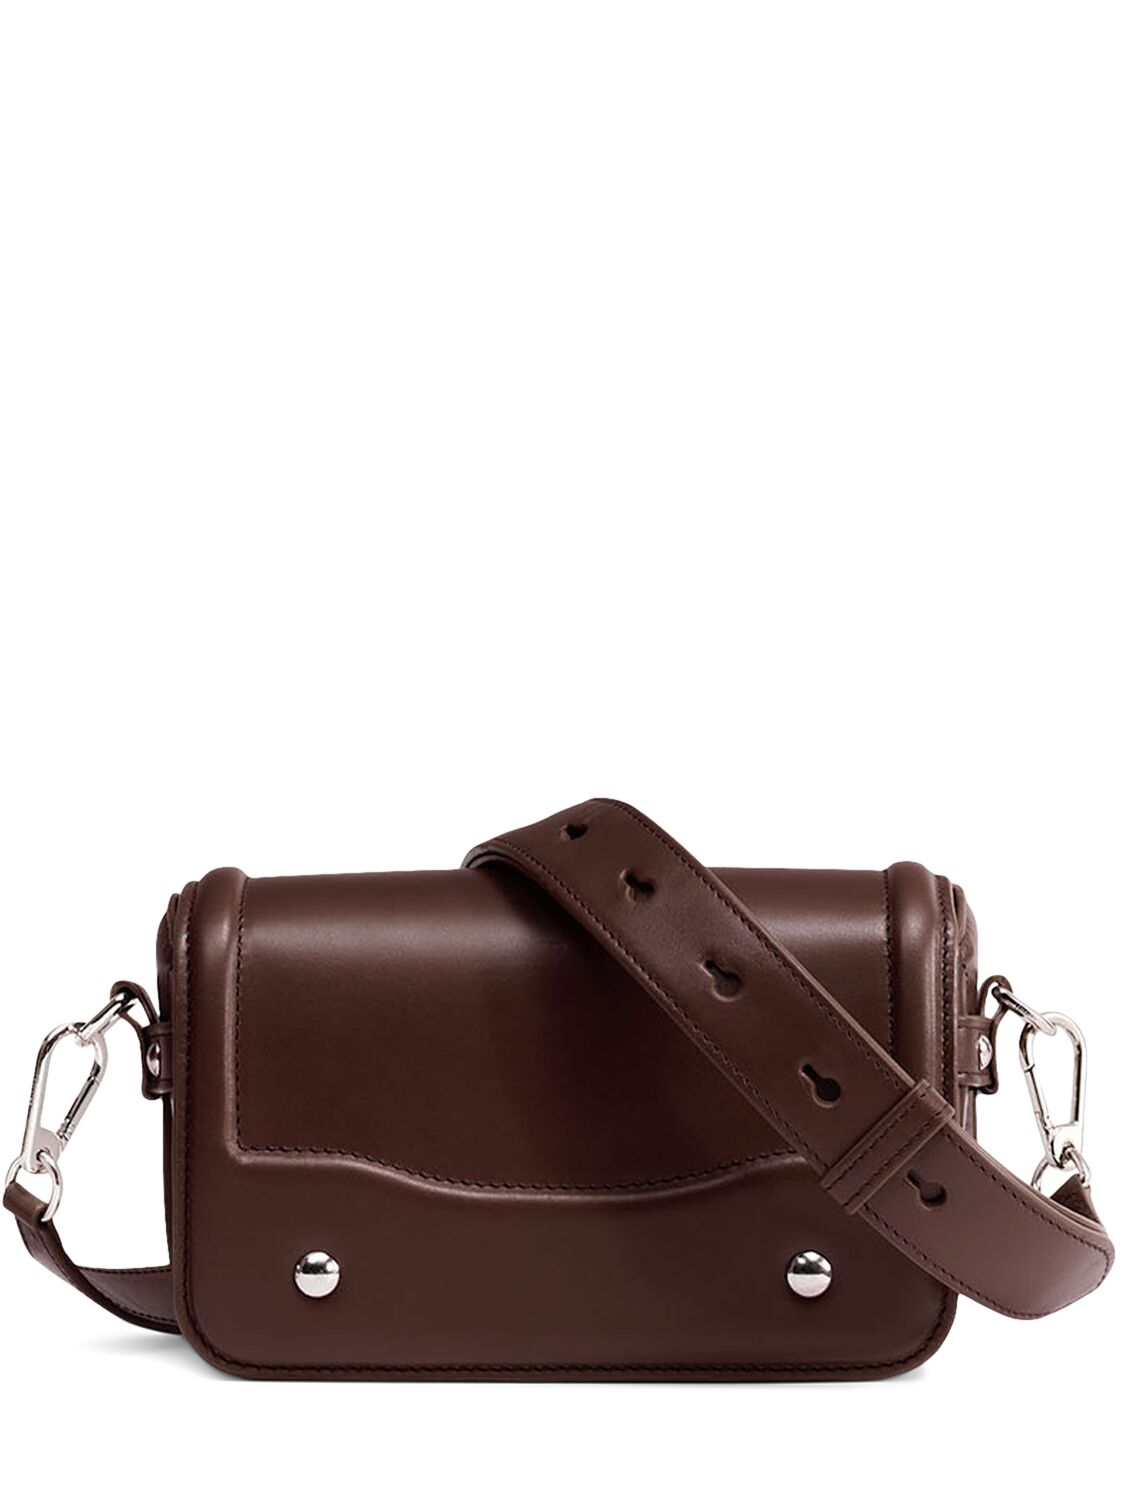 LEMAIRE MINI RANSEL GLOSSY SATCHEL LEATHER BAG